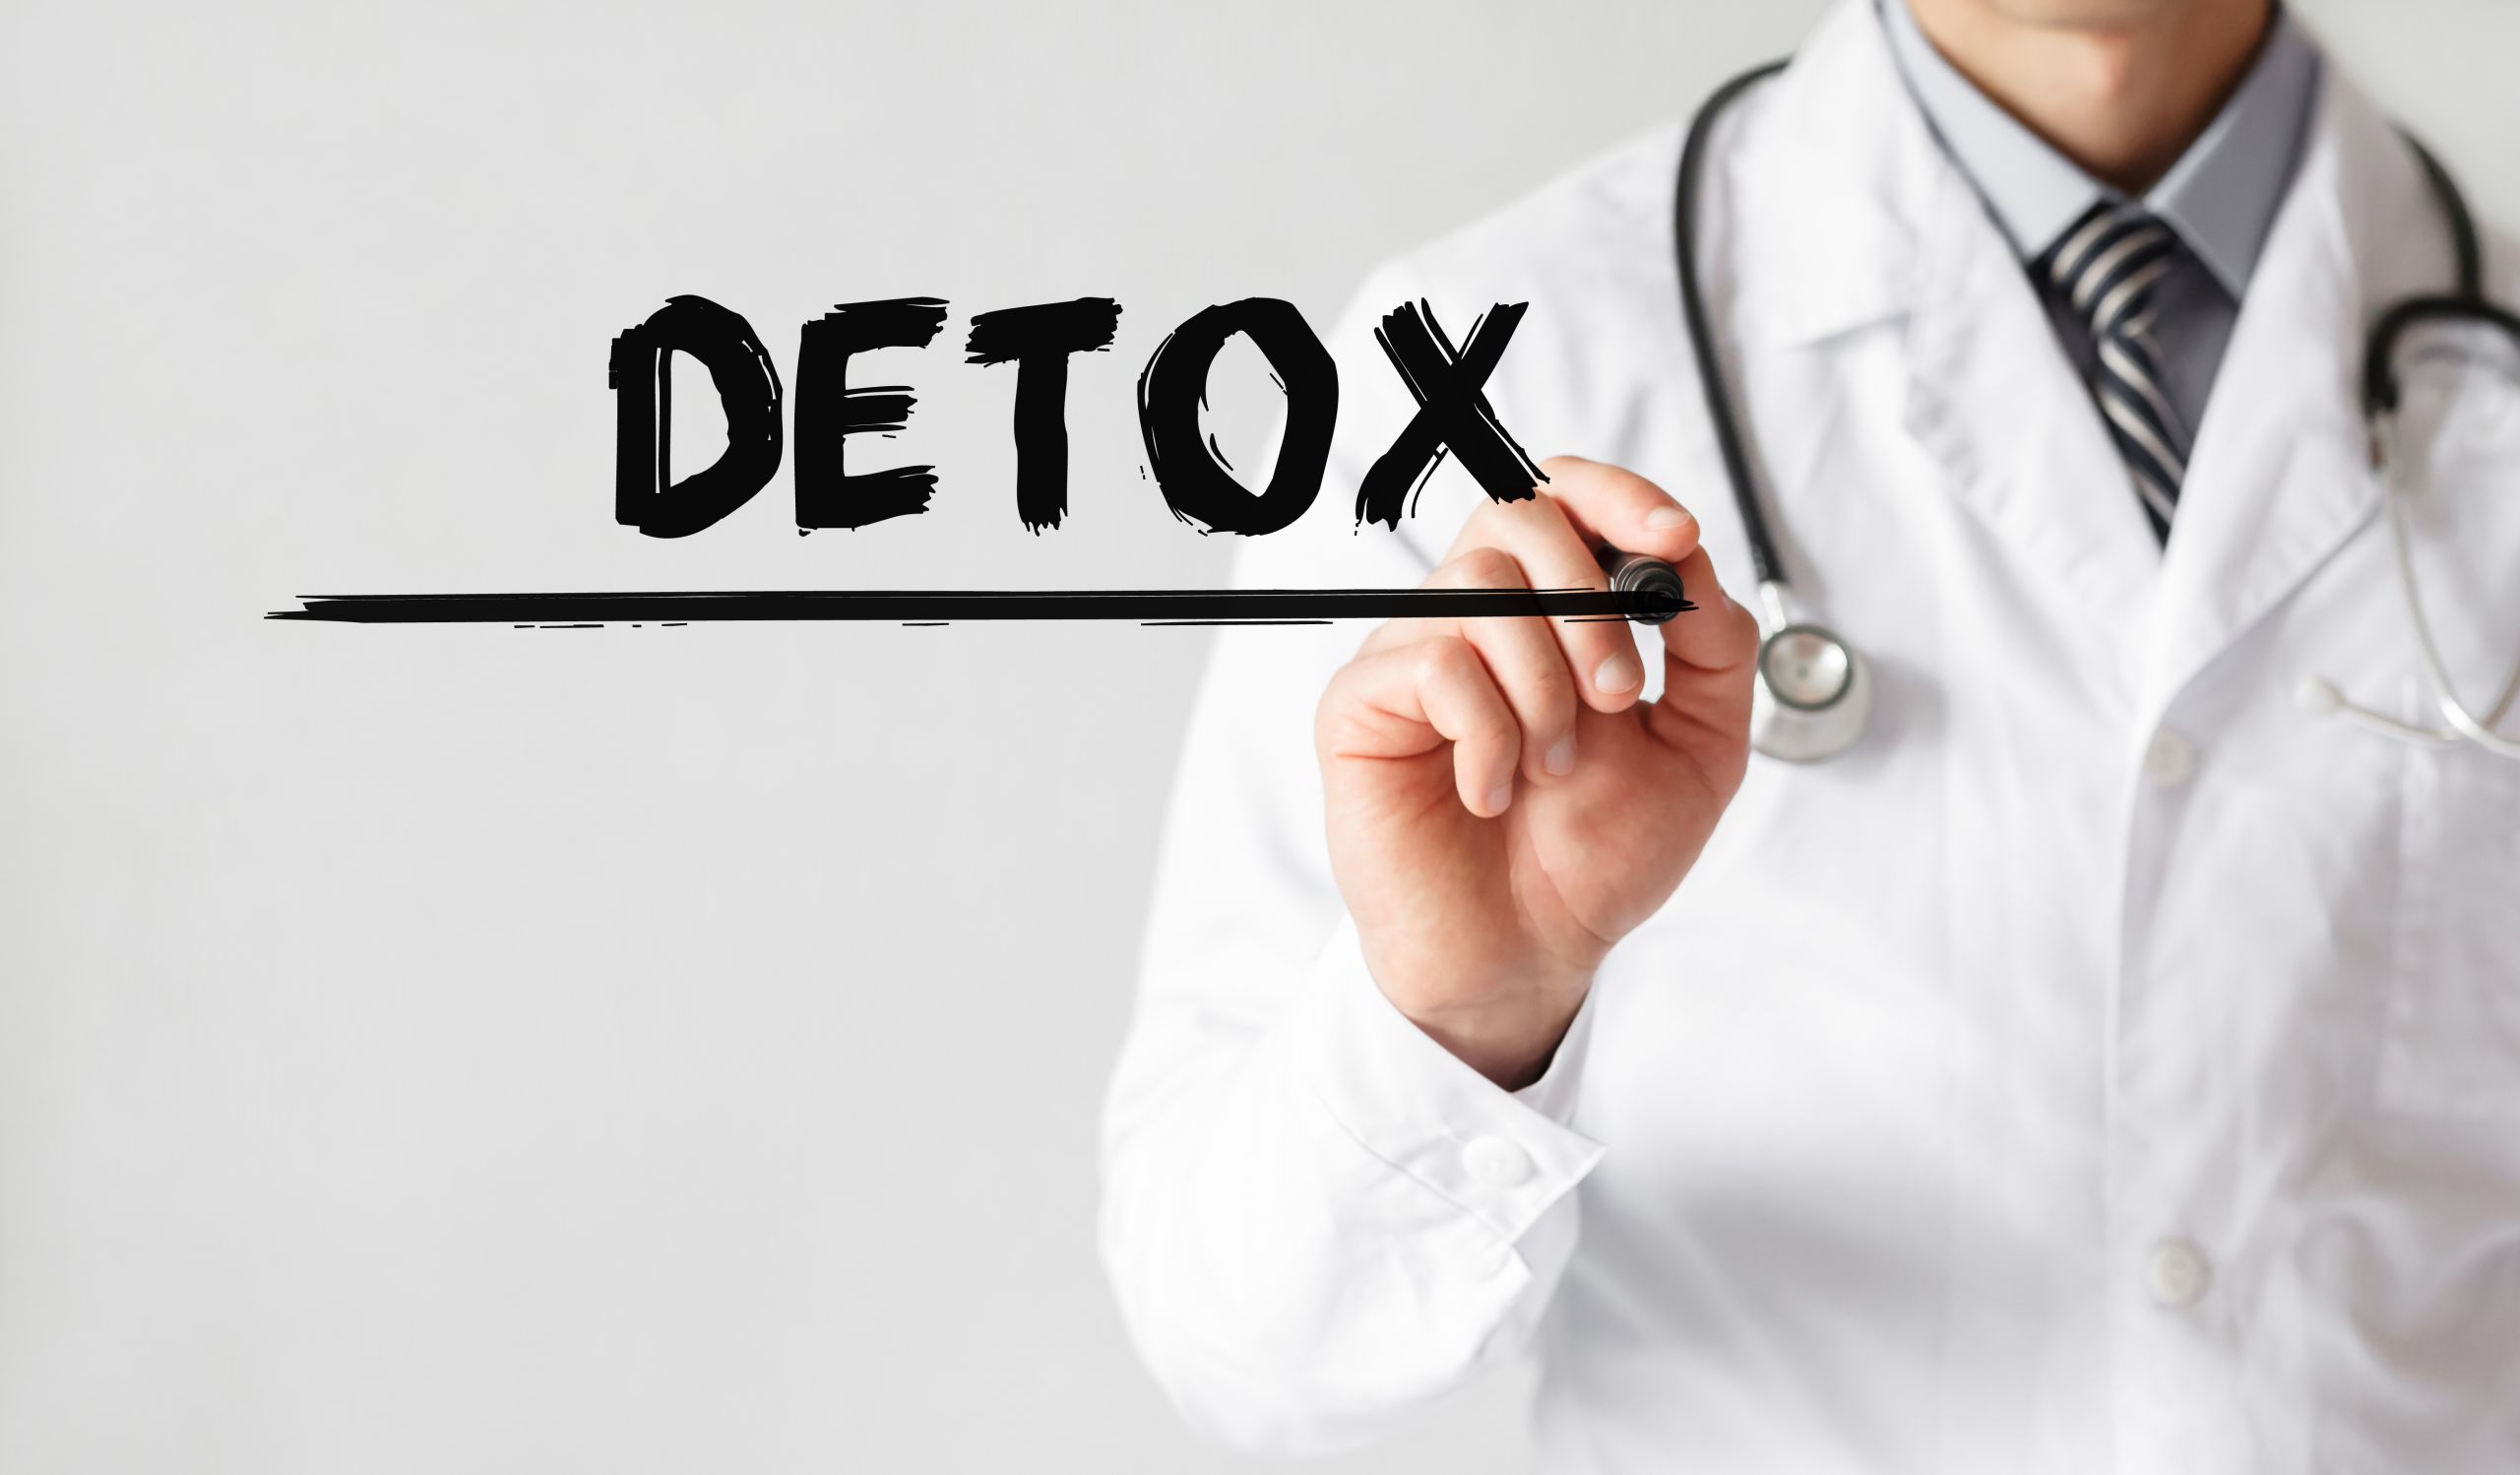 Doctor writing word Detox with marker, Medical - prepare for drug and alcohol detox